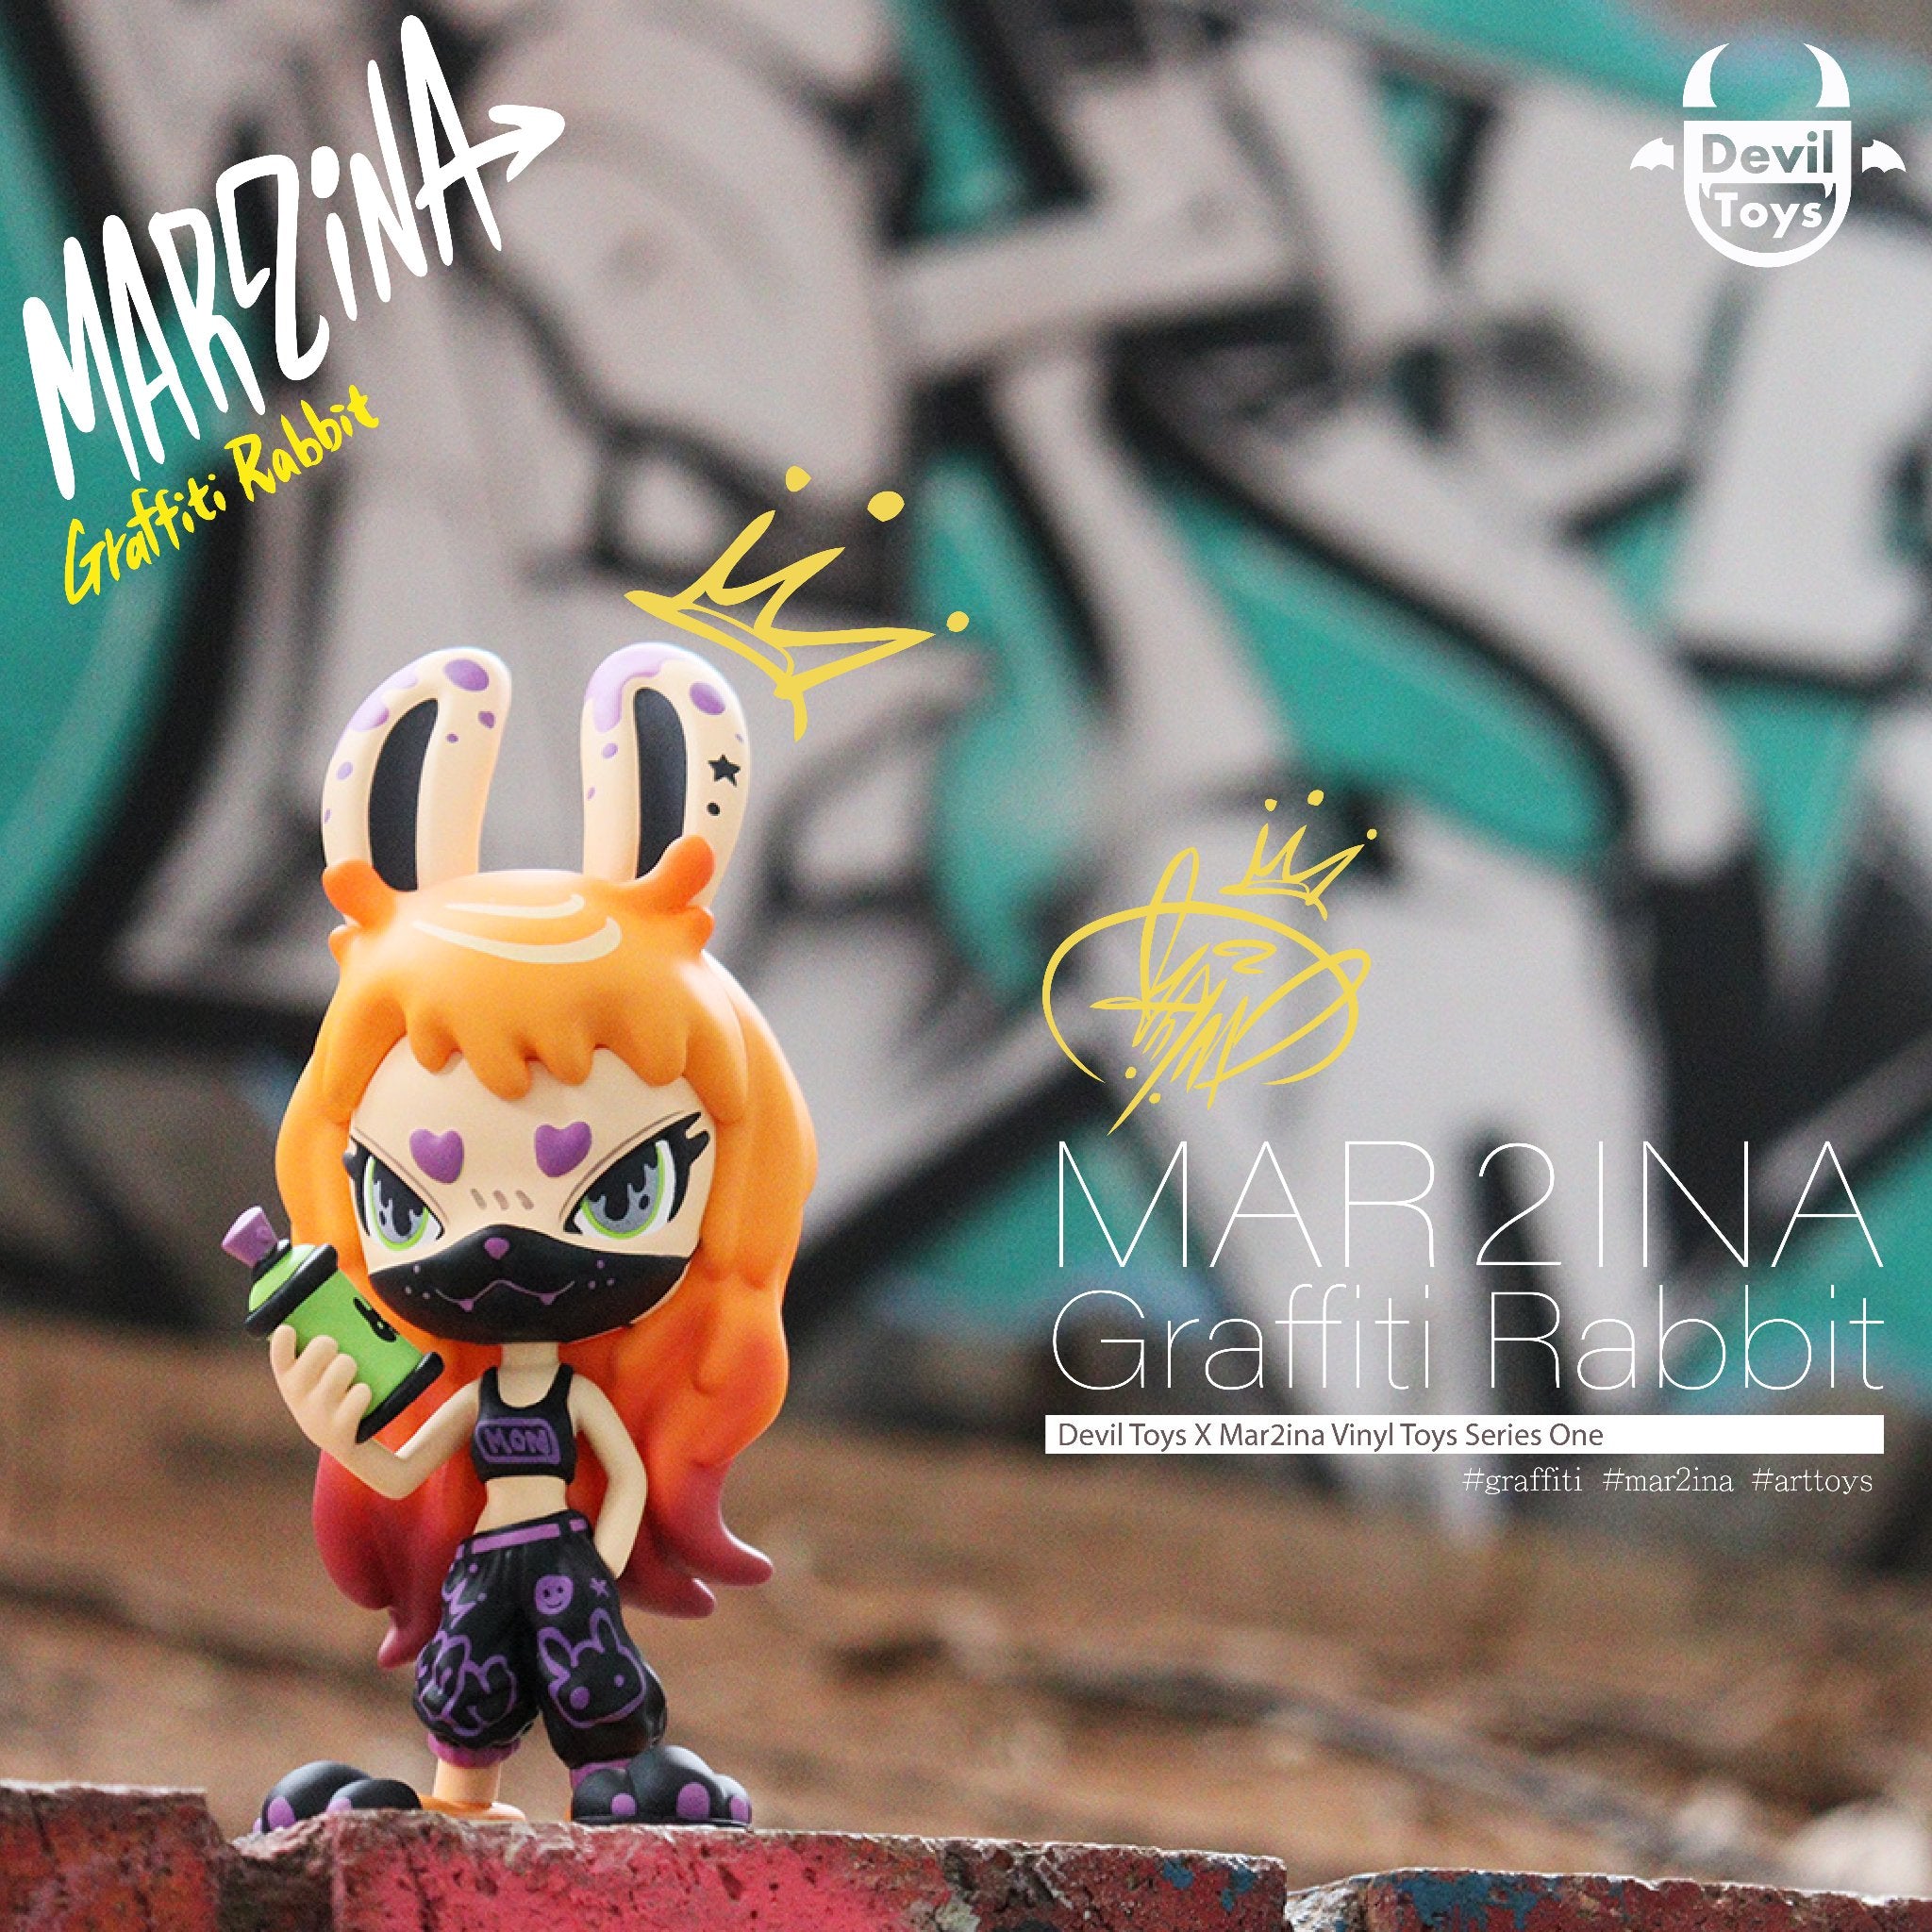 Mon-2 Graffiti Rabbit (Second Colorway) by Mar2ina